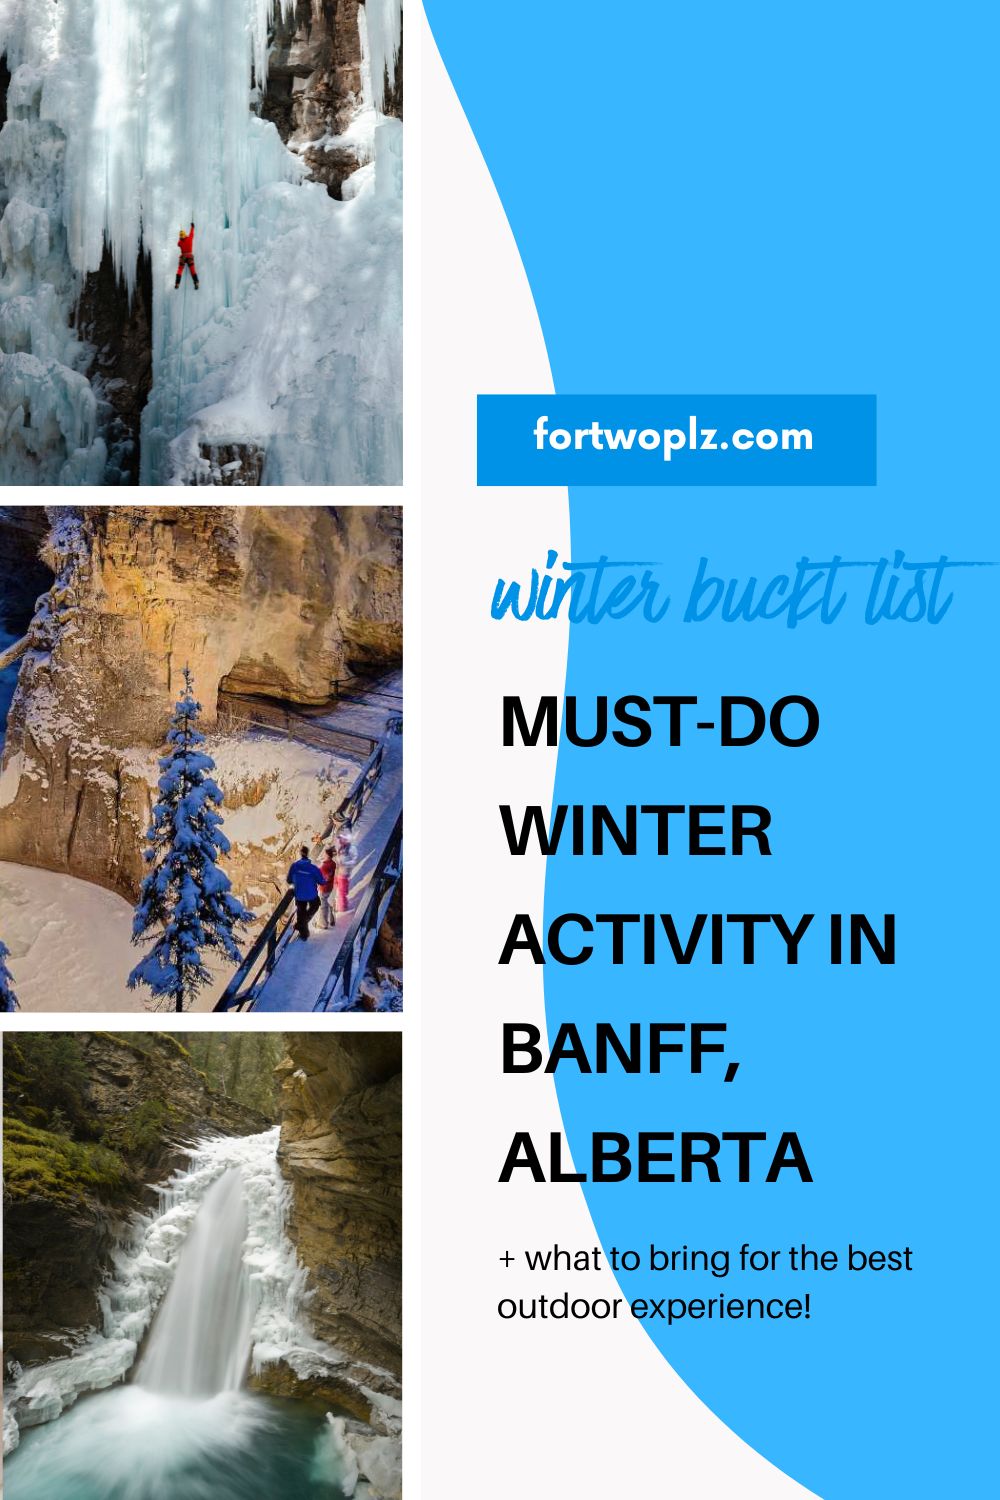 Johnston Canyon in Winter: 10 Important Things To Know Before You Go